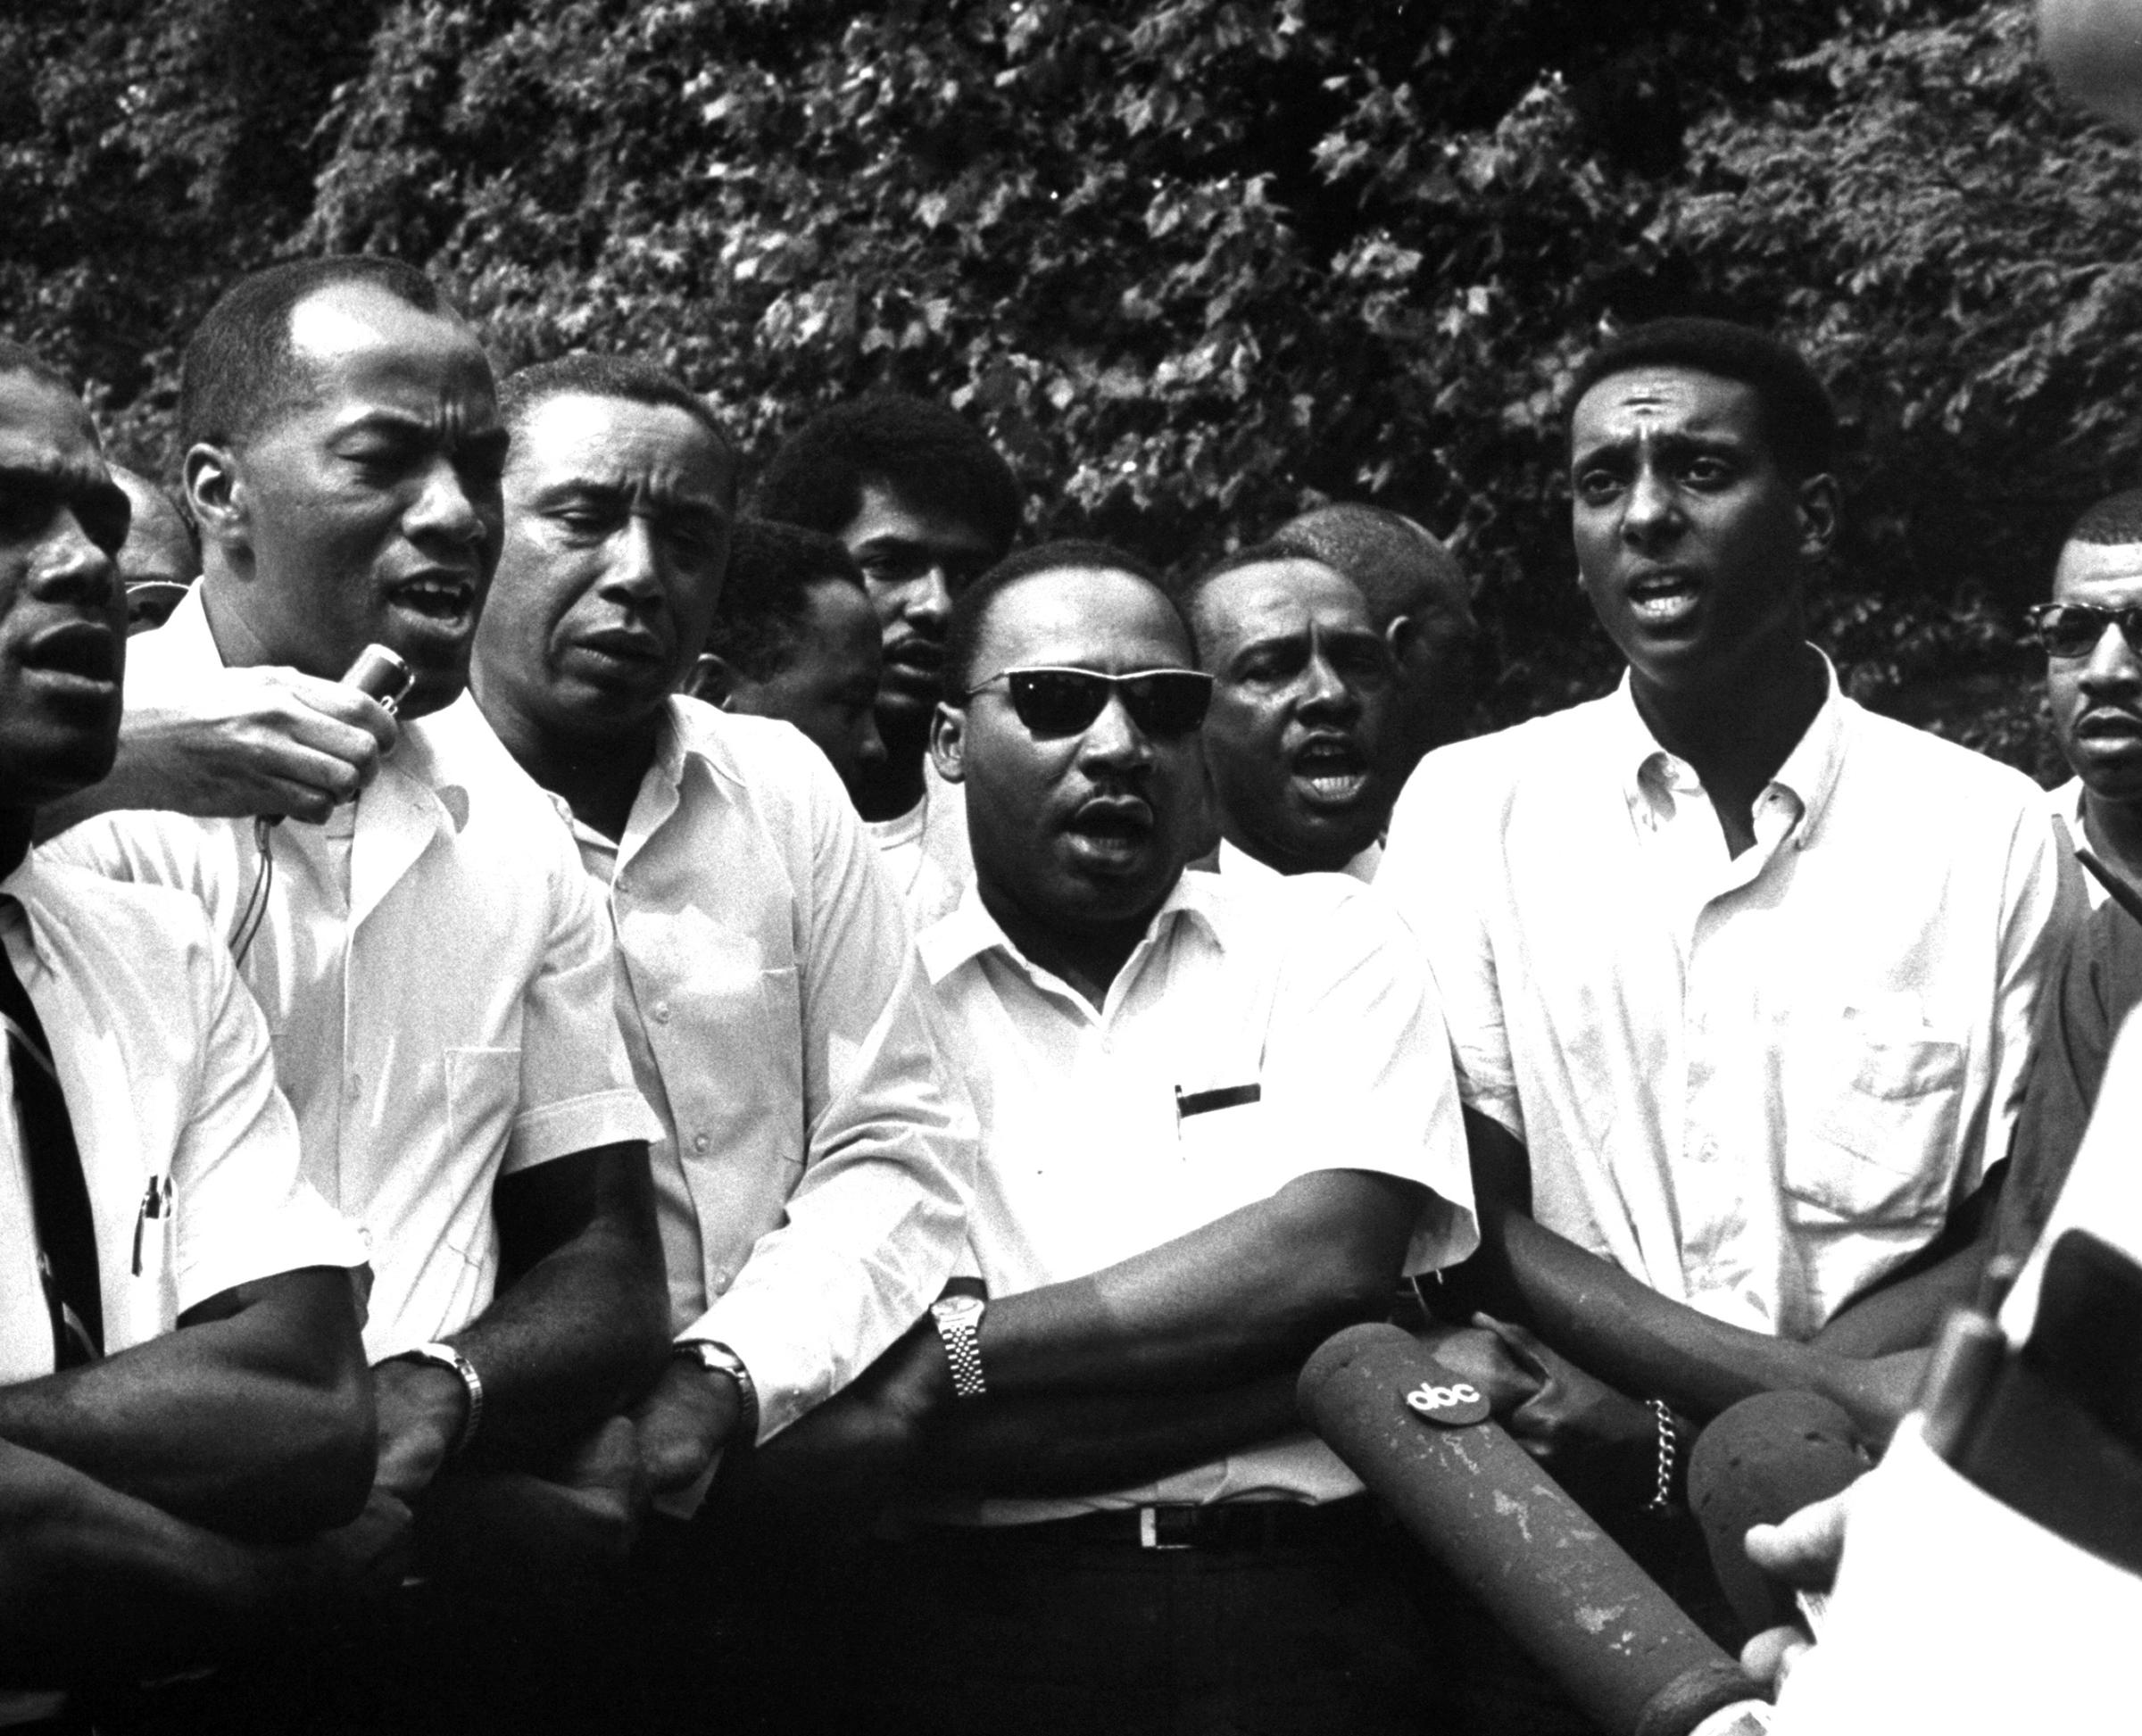 Civil rights leaders Floyd B. McKissick (fore, 3L), Dr. Martin Luther King Jr. (4R) and Stokely Carmichael (2R) participating in voter registration march after originator James H. Meredith was shot, 1966.